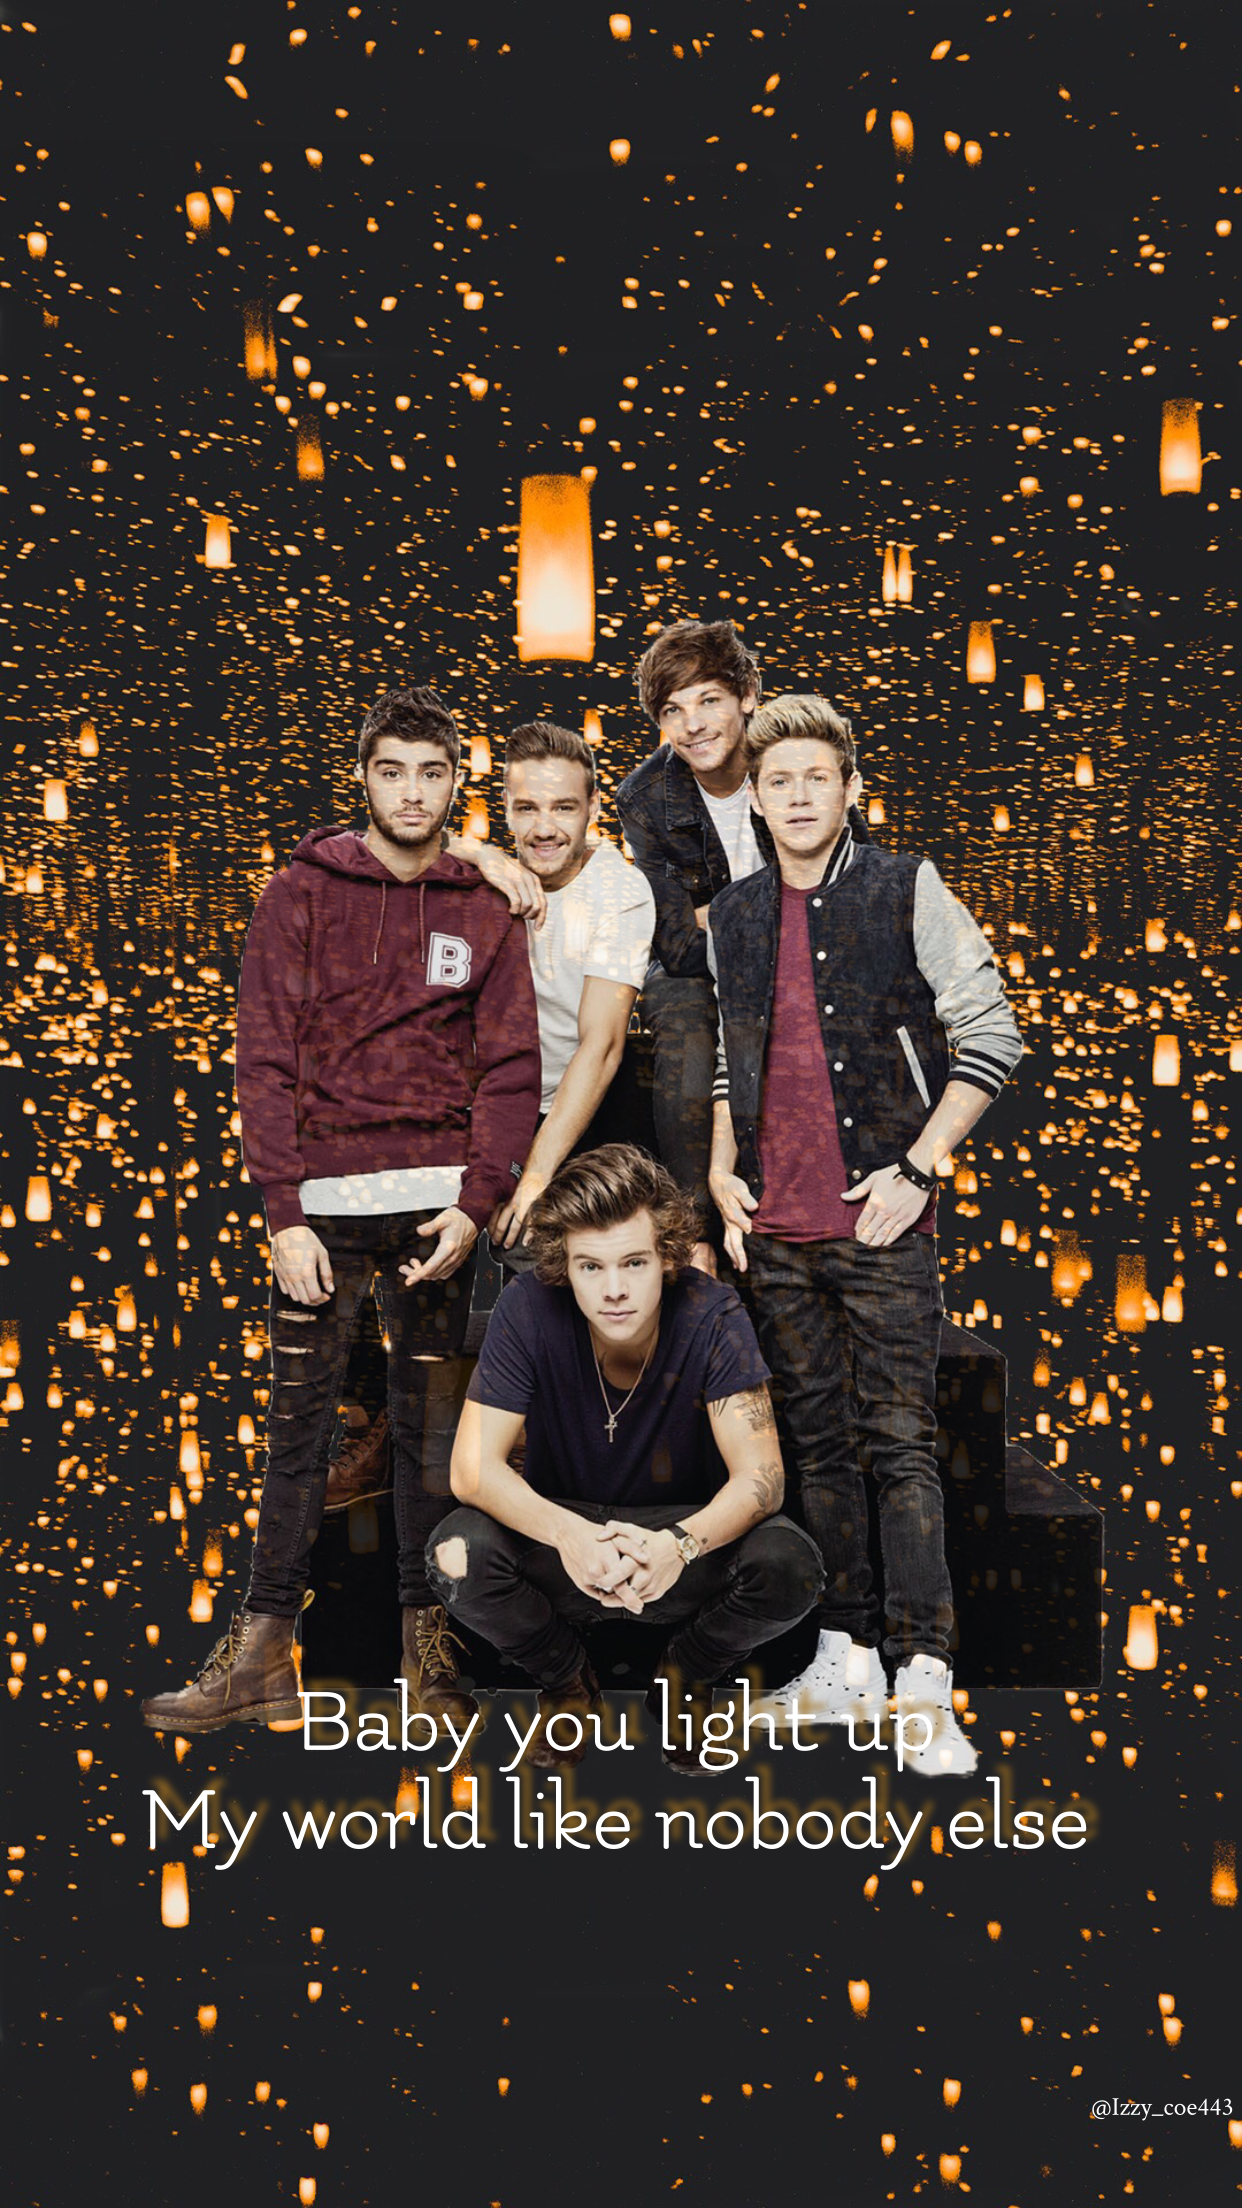 One Direction ❤️. One direction songs, One direction wallpaper, One direction picture